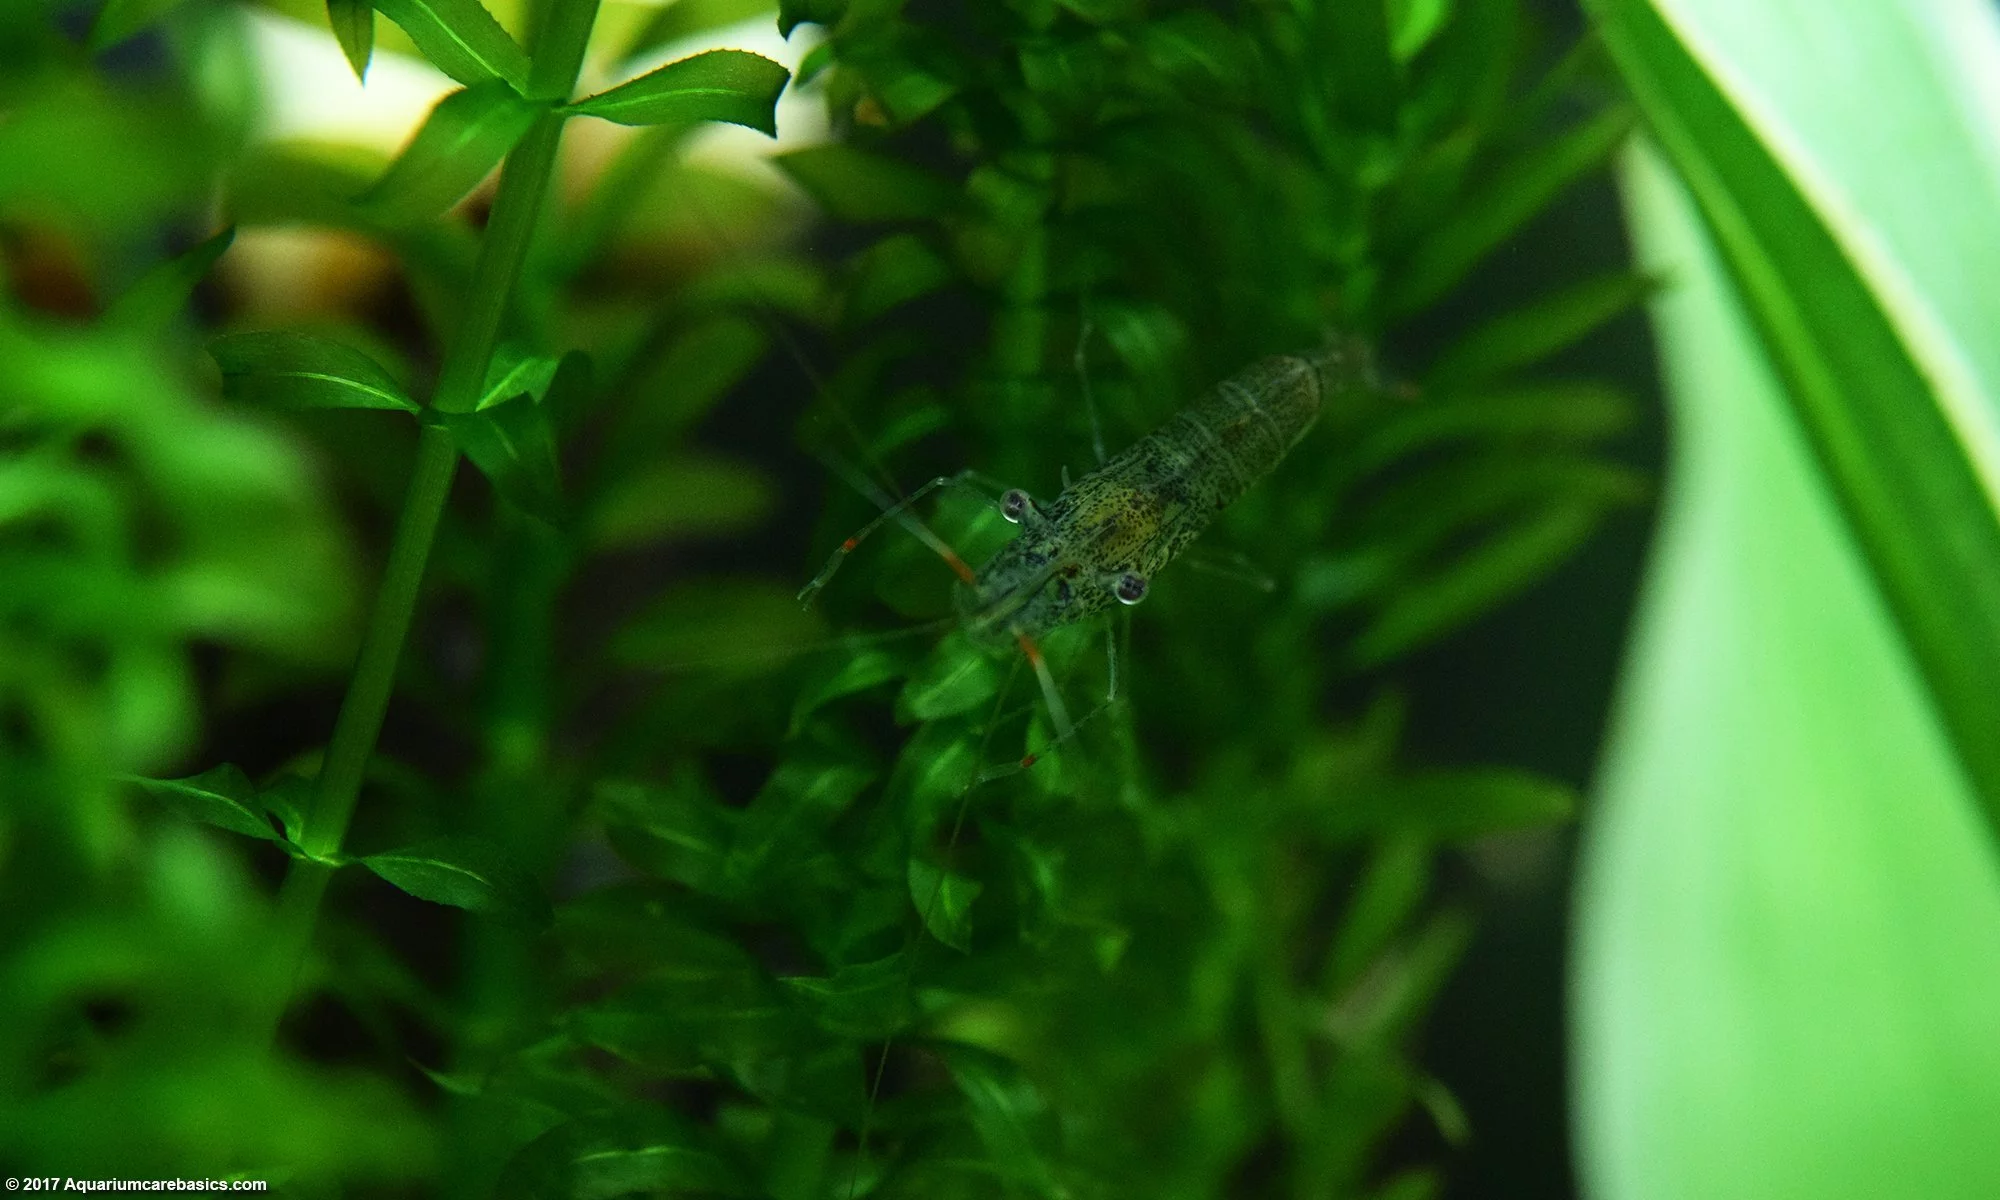 Anacharis Plant Growth Provides Cover For Ghost Shrimp